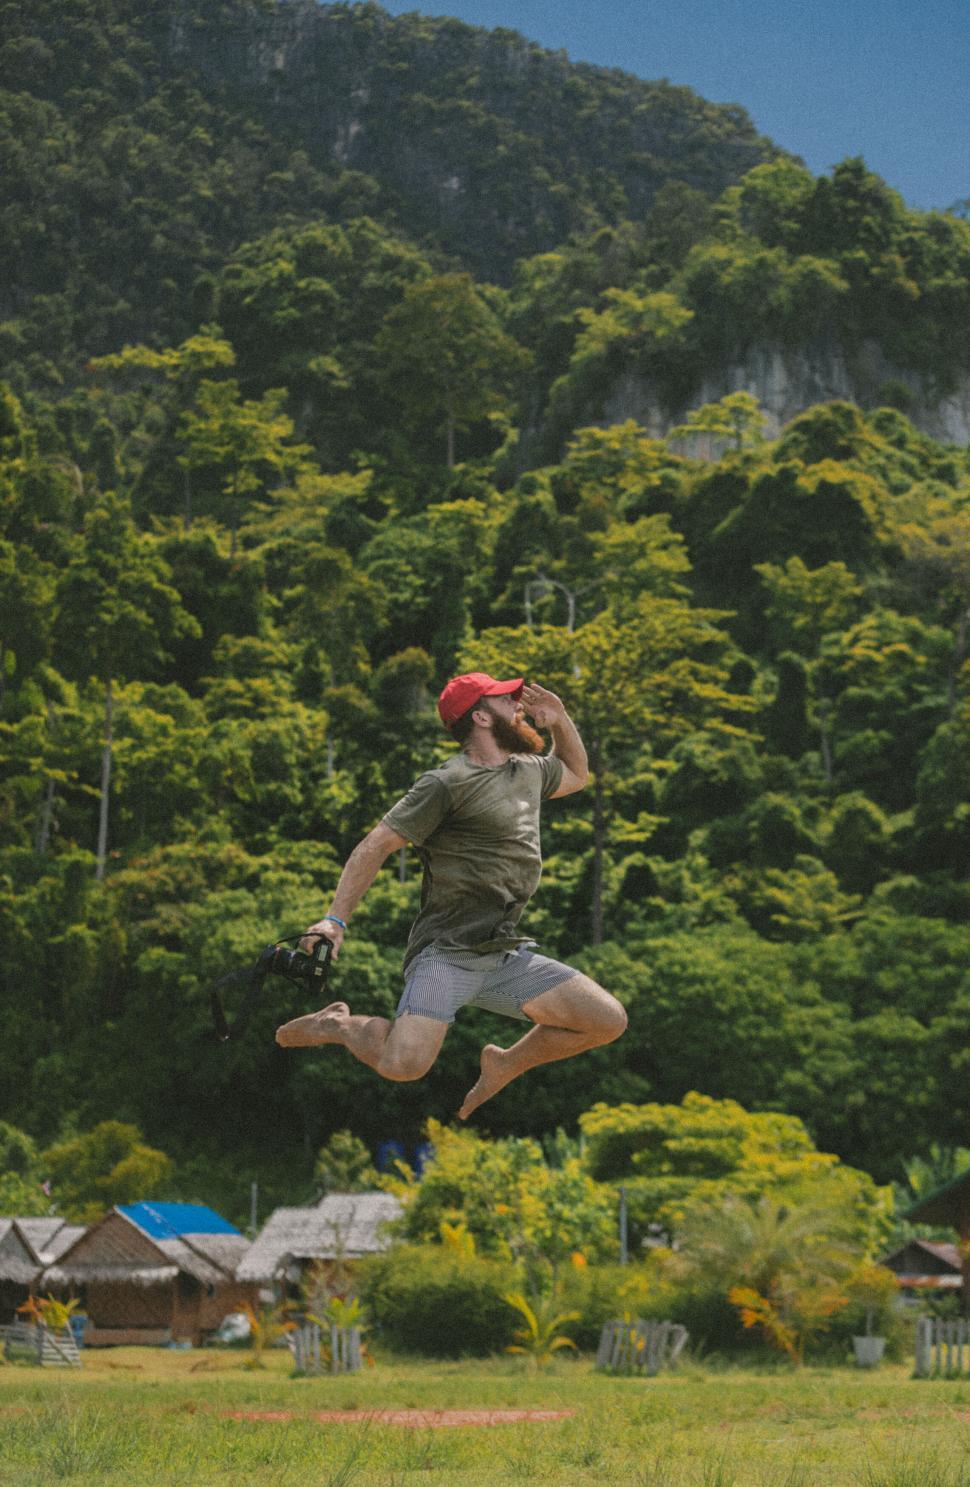 Free Image of Man jumping with a camera in natural scenery 